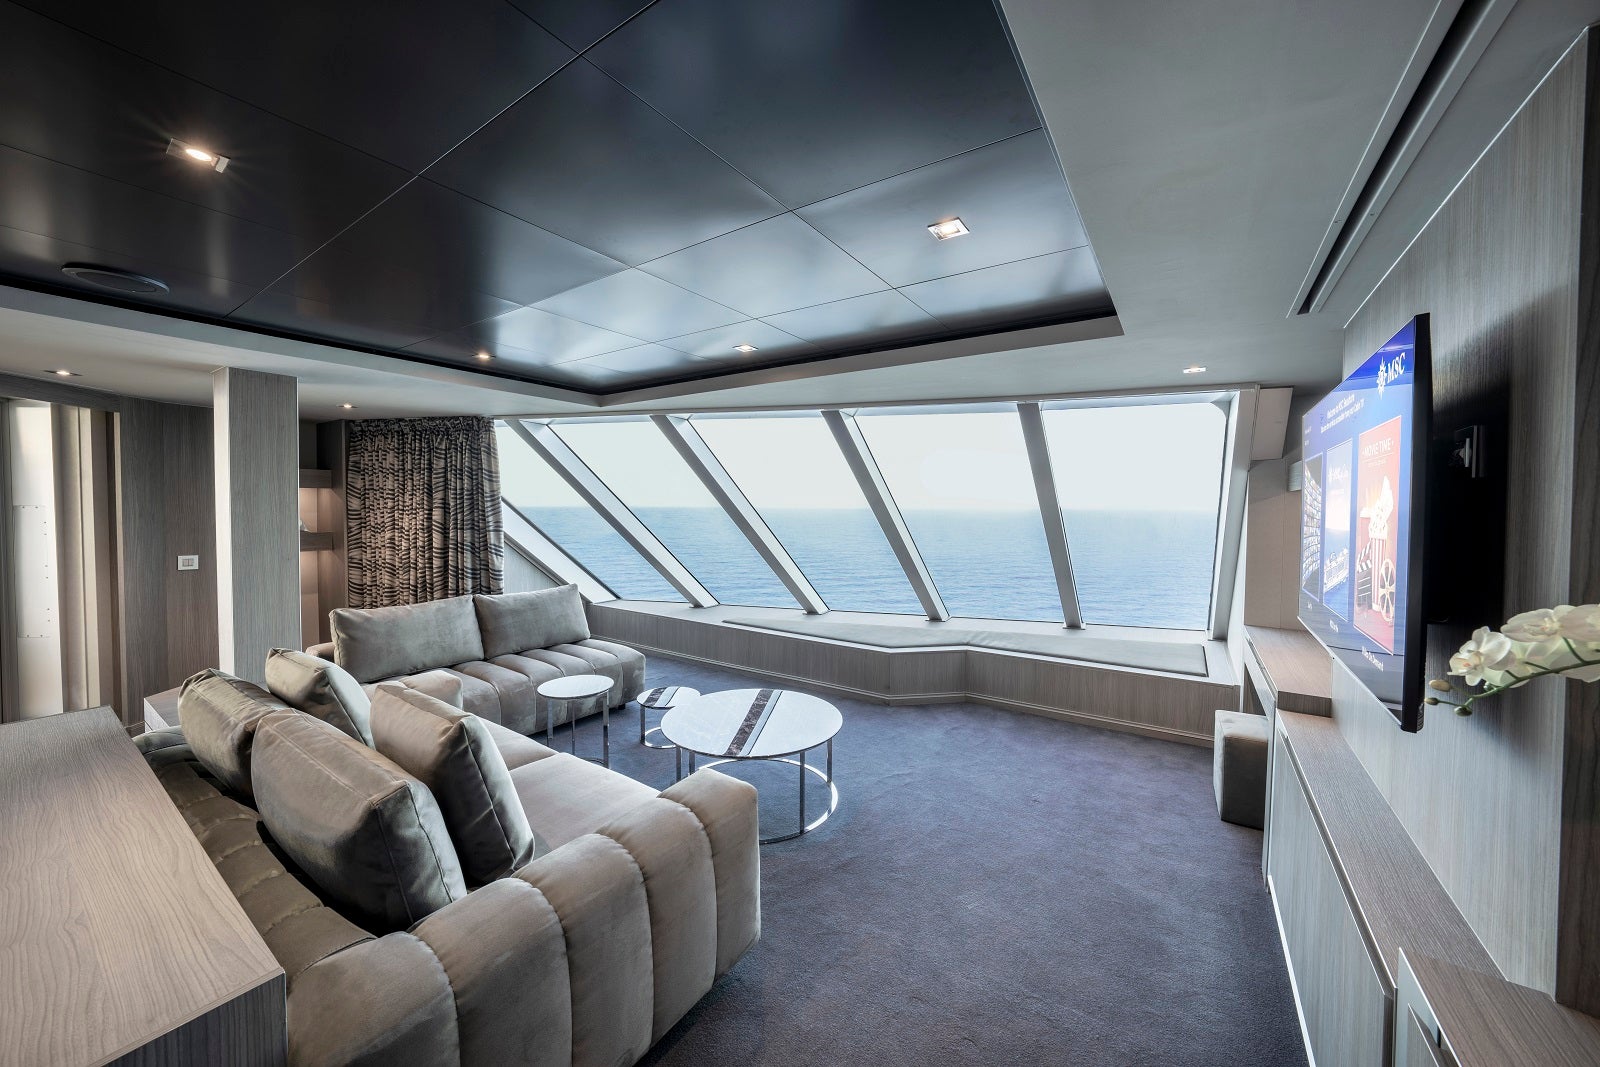 A cruise ship cabin decorated in shades of gray has a wall of windows and a view of the ocean